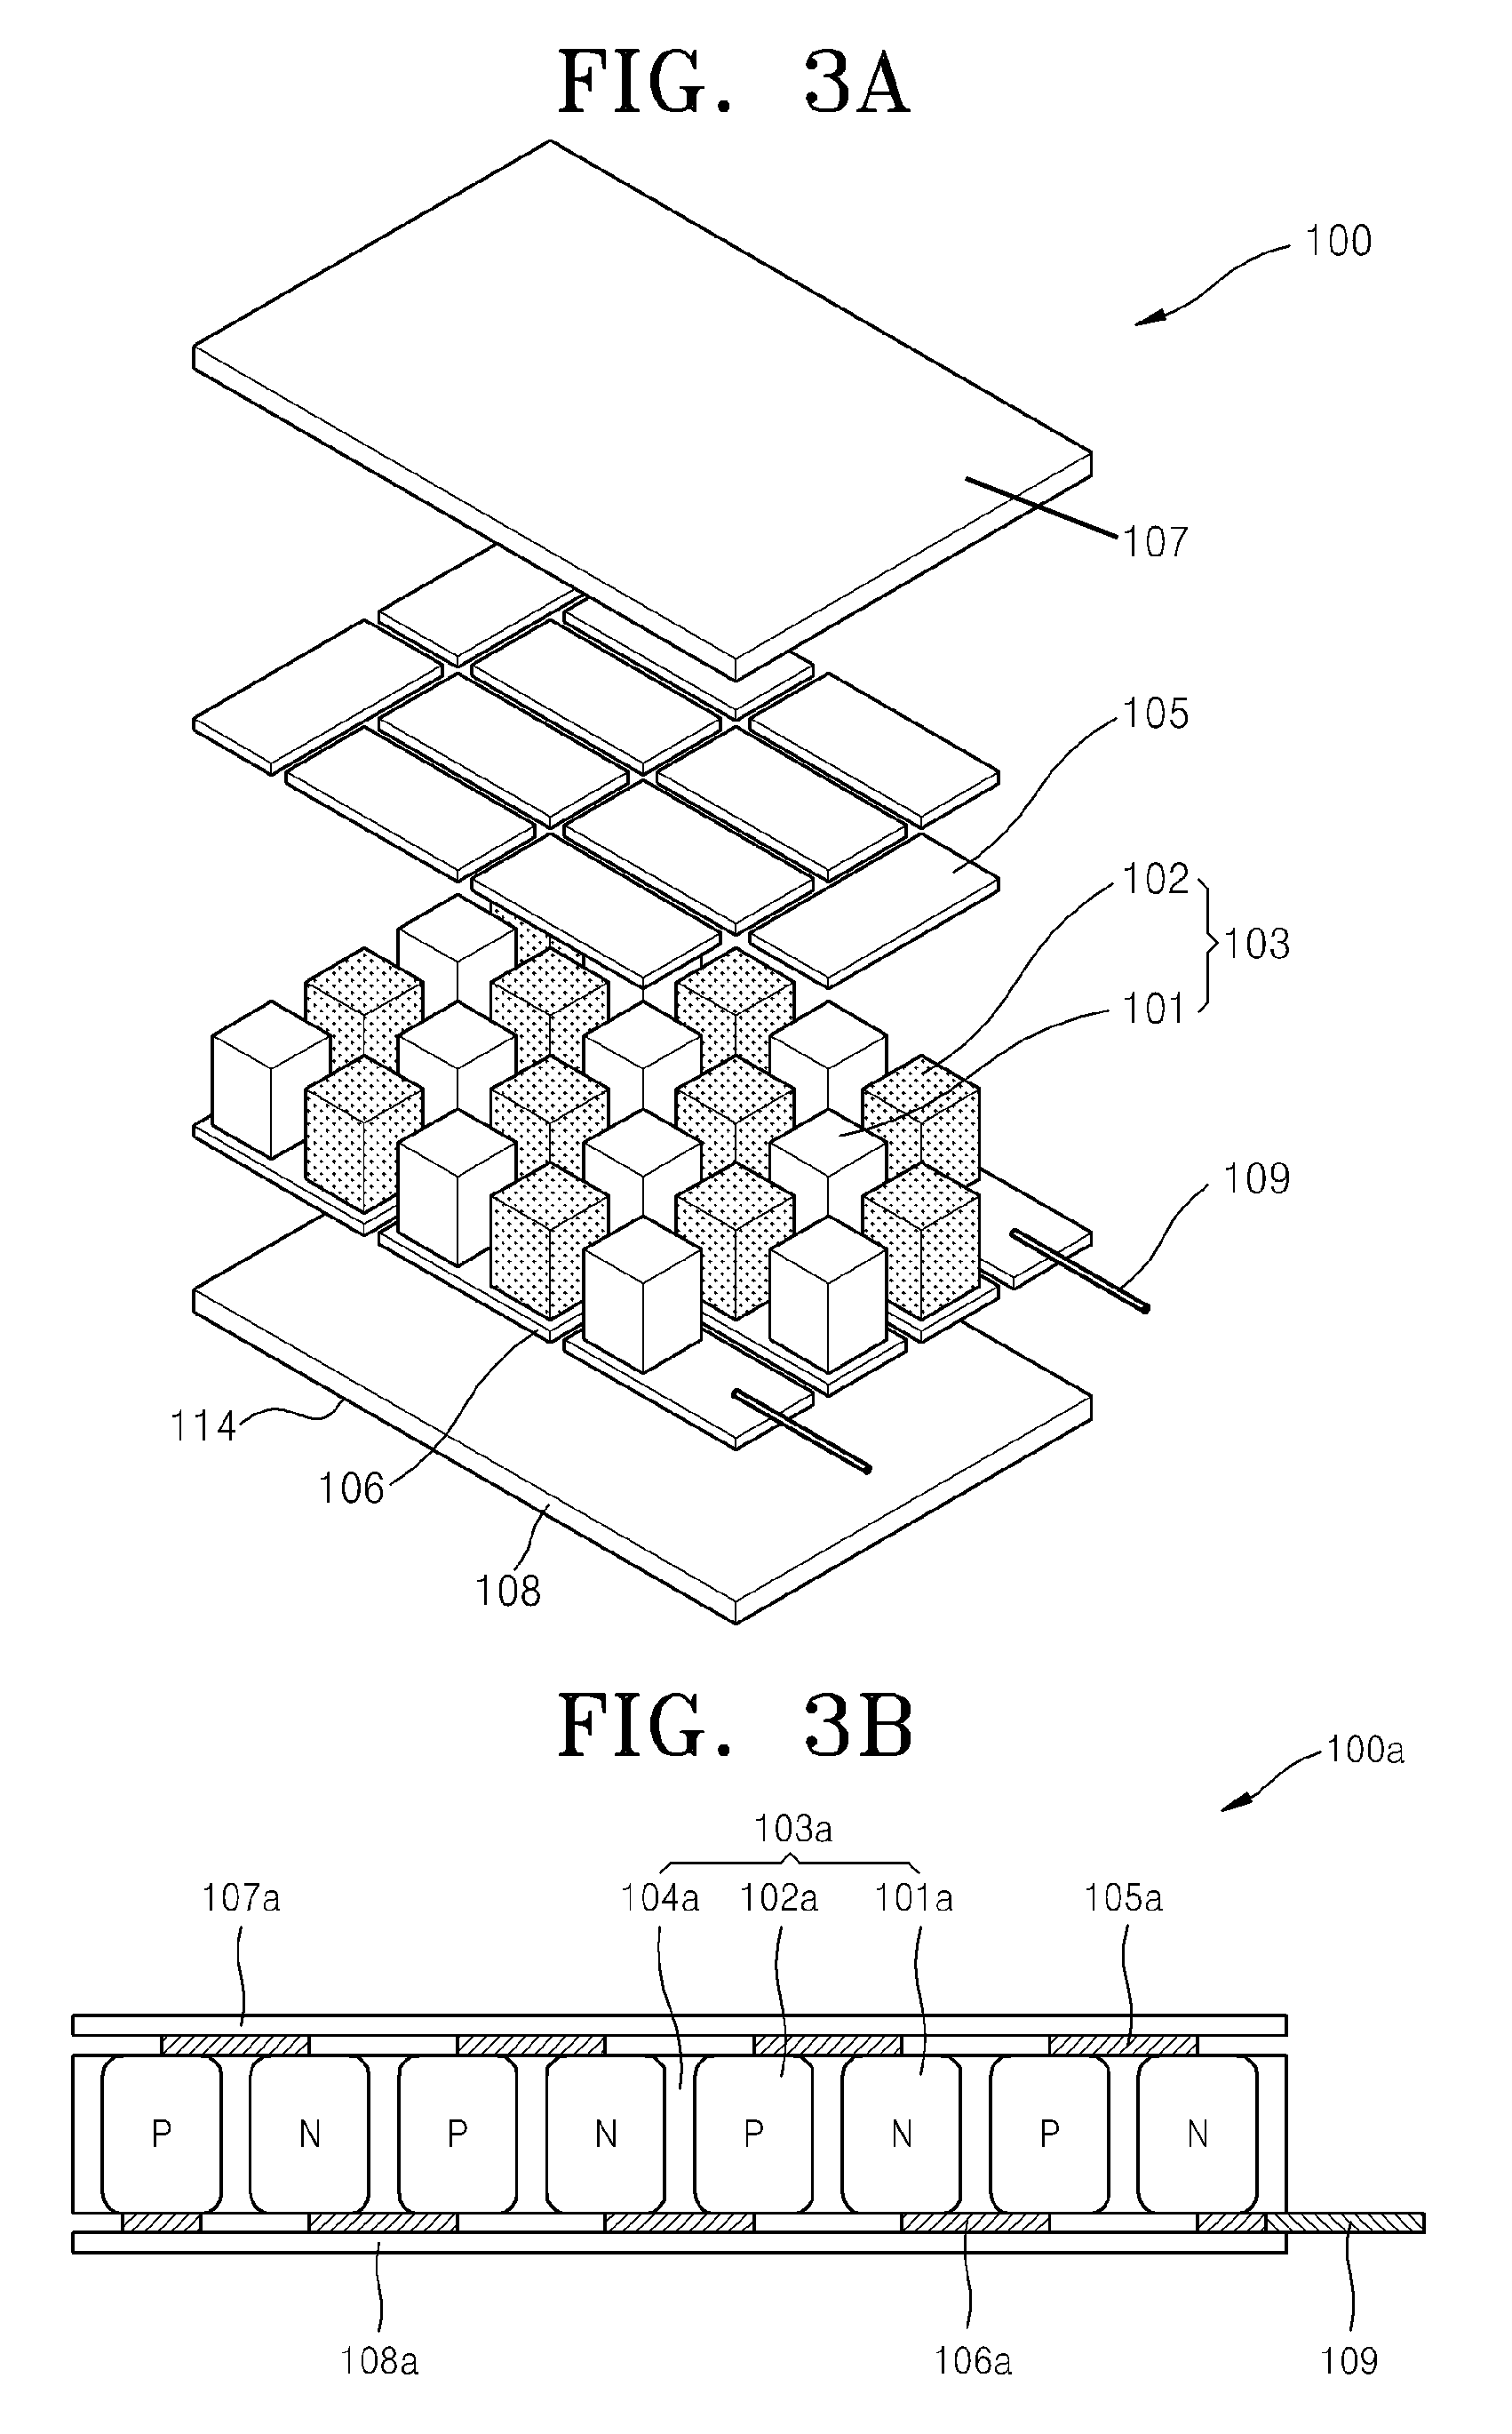 Power Device Packages Having Thermal Electric Modules Using Peltier Effect and Methods of Fabricating the Same